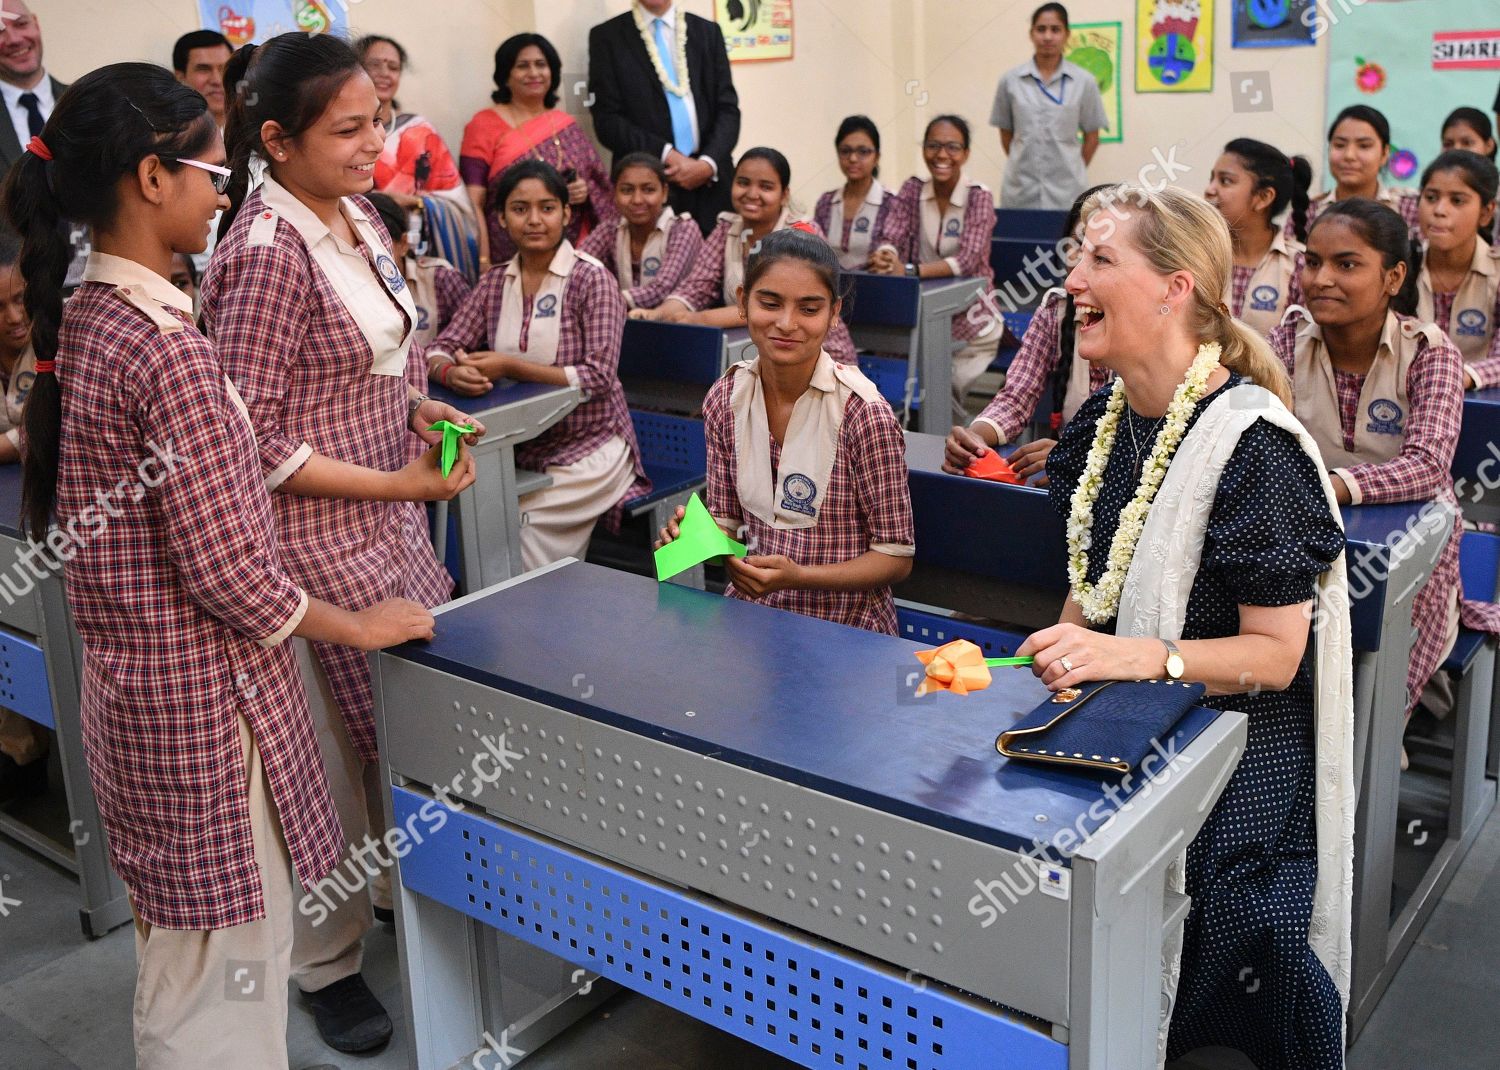 sophie-countess-of-wessex-visit-to-india-shutterstock-editorial-10227195ai.jpg